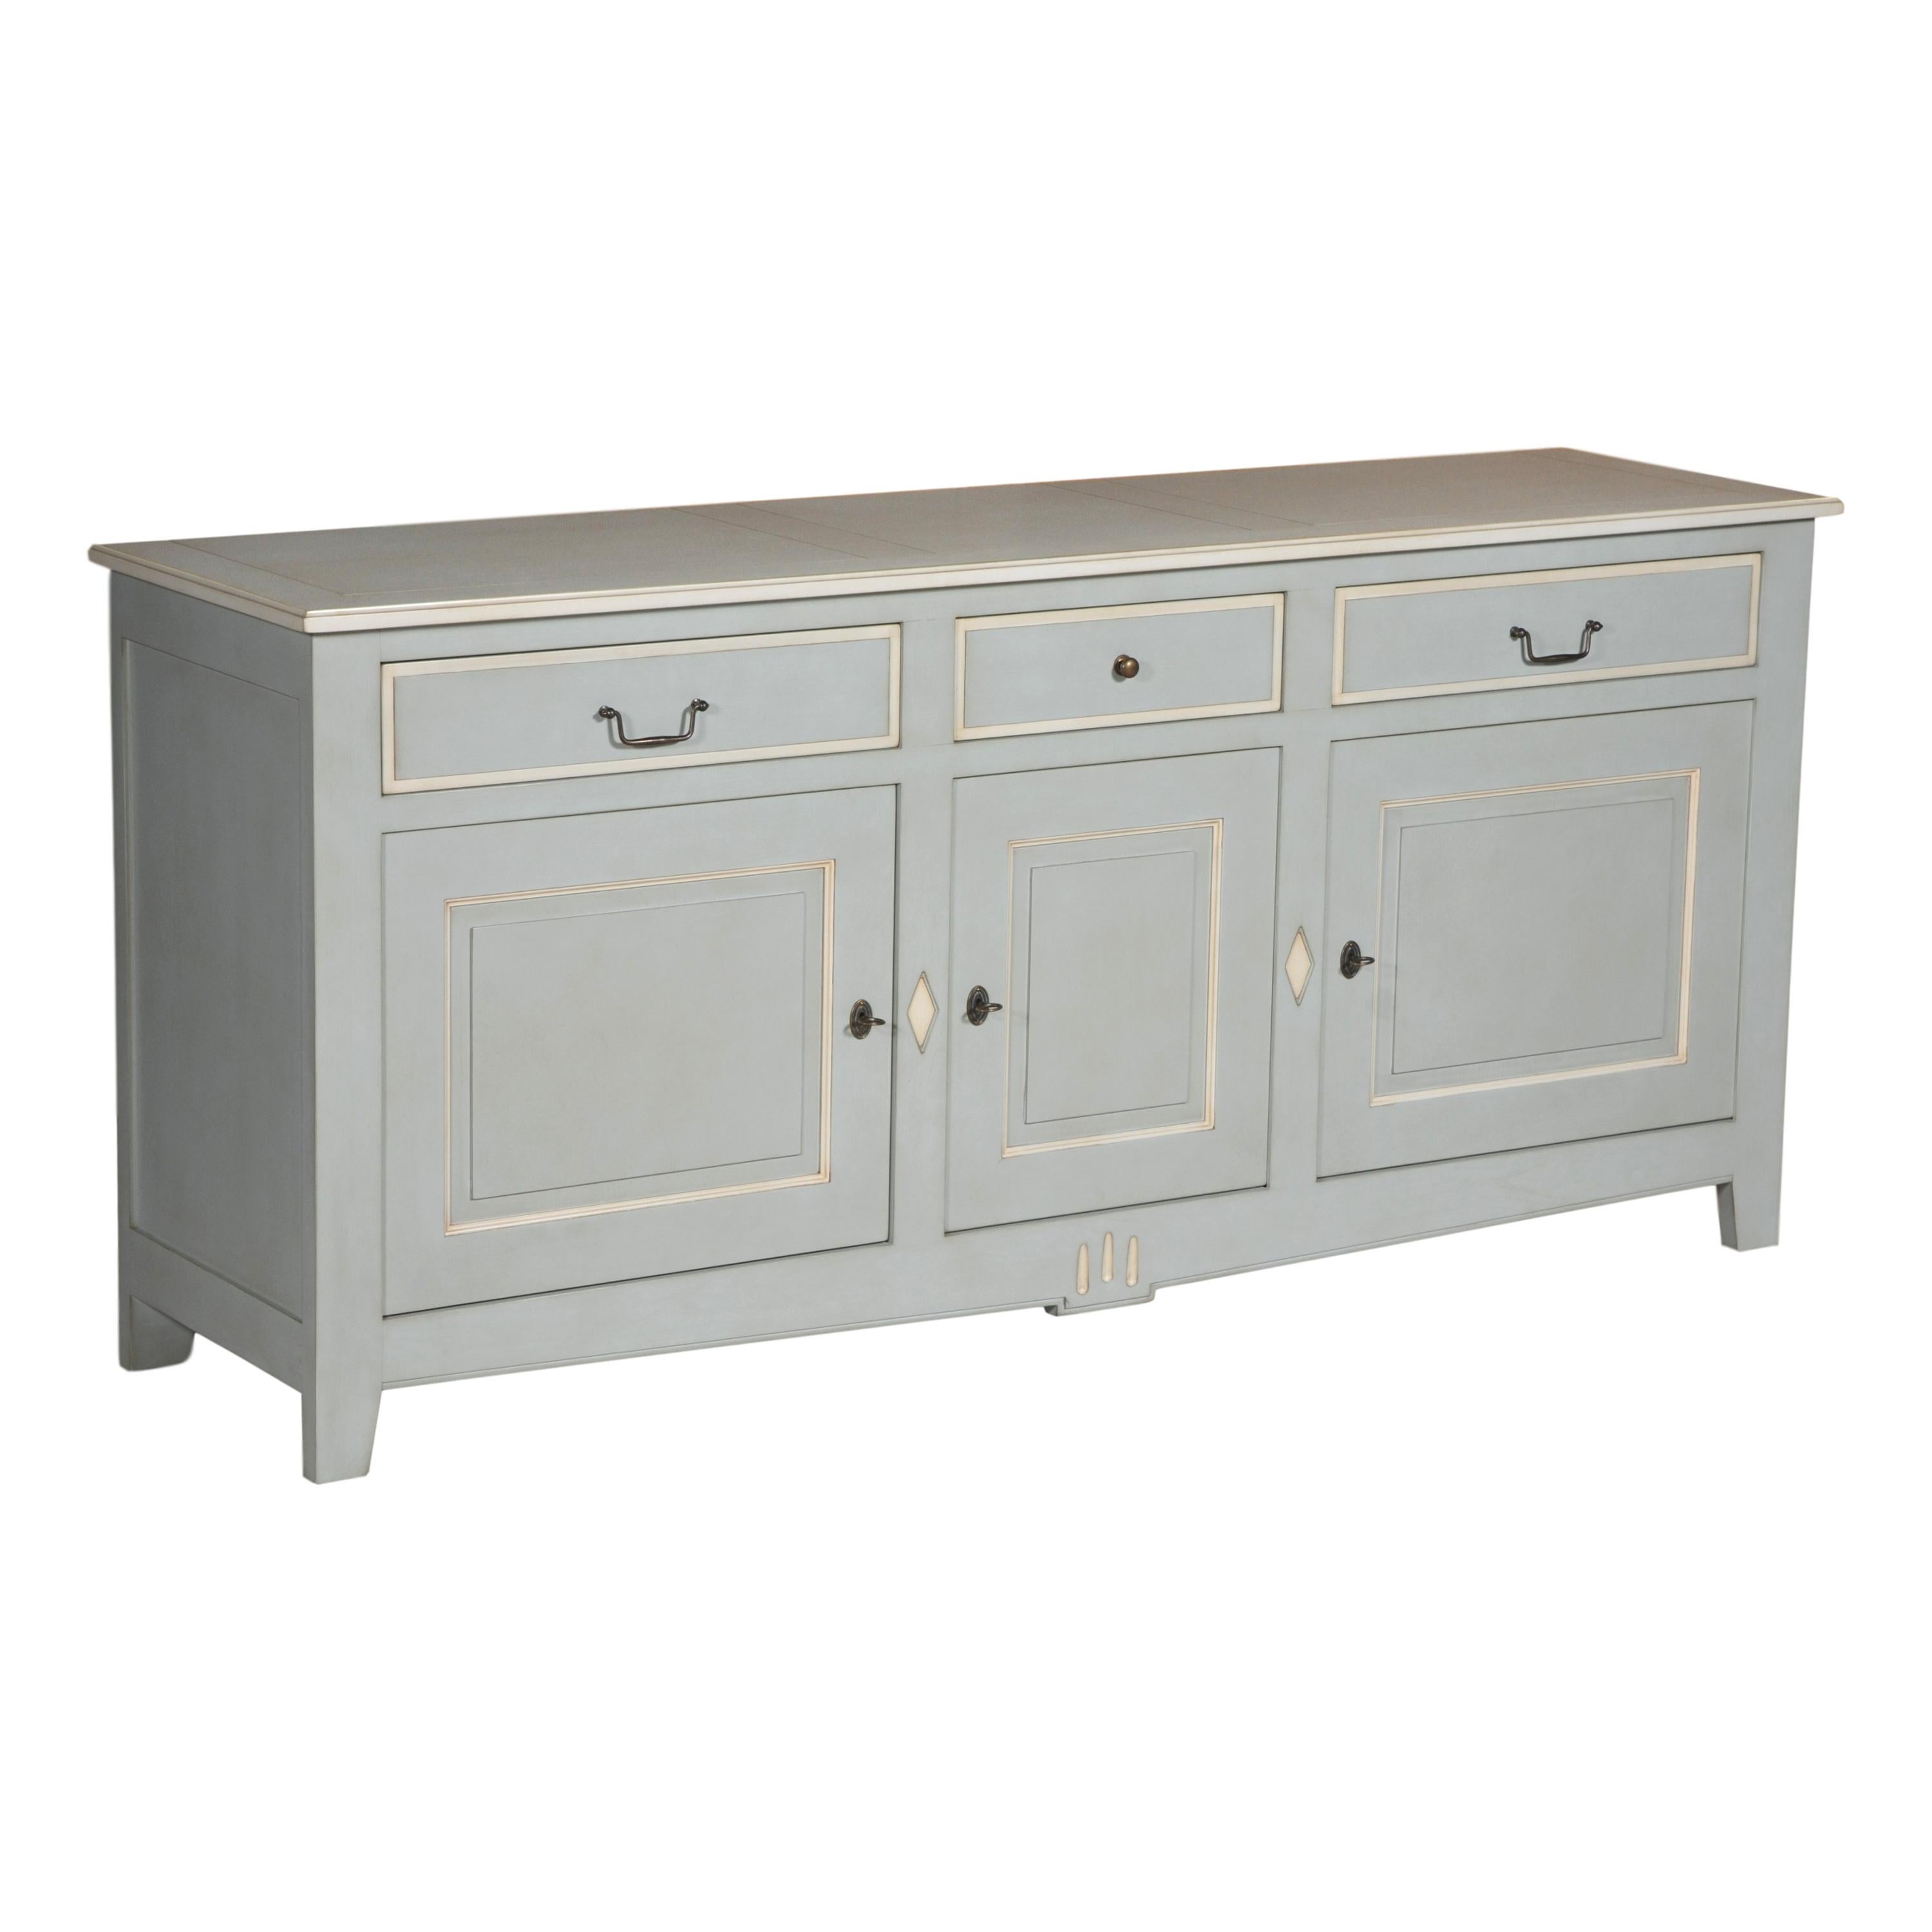 Neoclassical 3 Doors 3 Drawers Blue-Grey Lacquered Sideboard, Solid French Cherry Wood For Sale